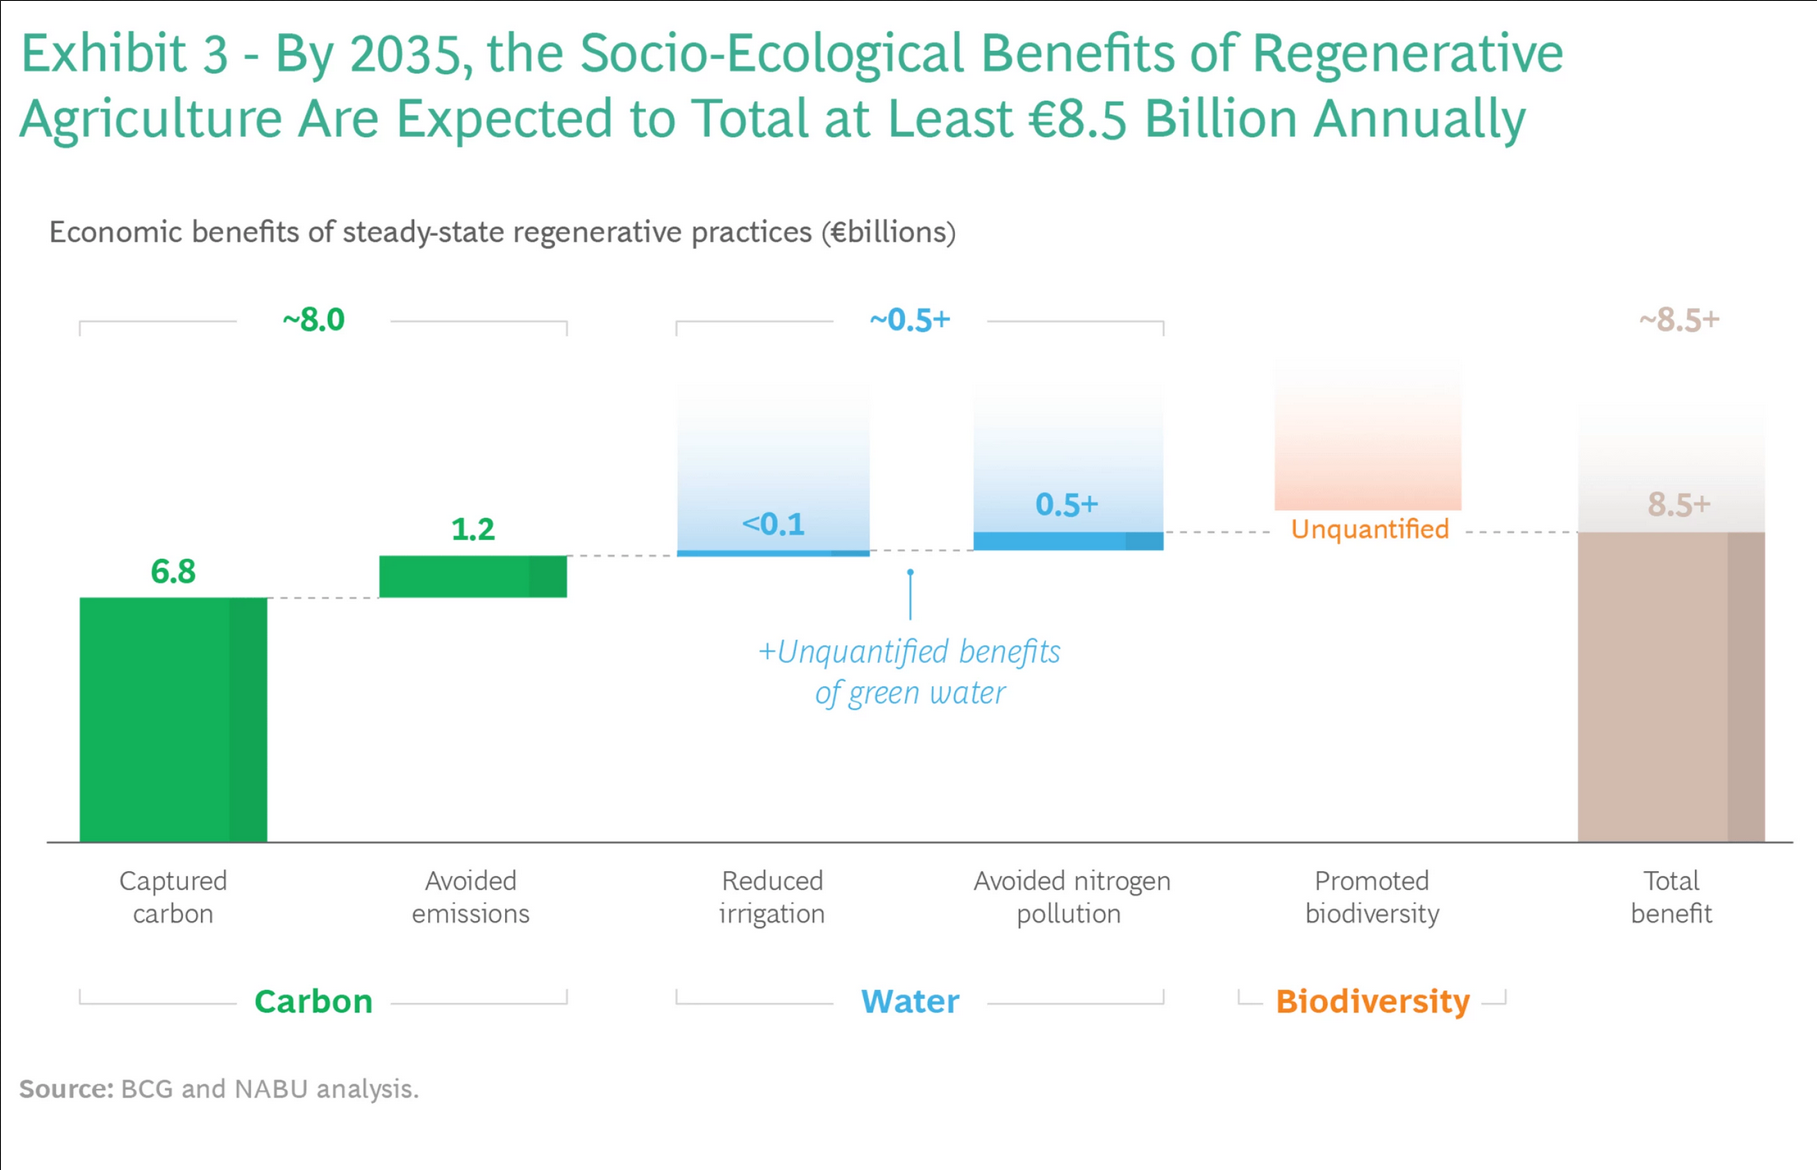 Exhibit from BCG report "The Case for Regenerative Agriculture in Germany—and Beyond" showing a total potential benefit of 8.5 billion euro per year of regenerative agriculture.
 https://www.bcg.com/publications/2023/regenerative-agriculture-benefits-germany-beyond